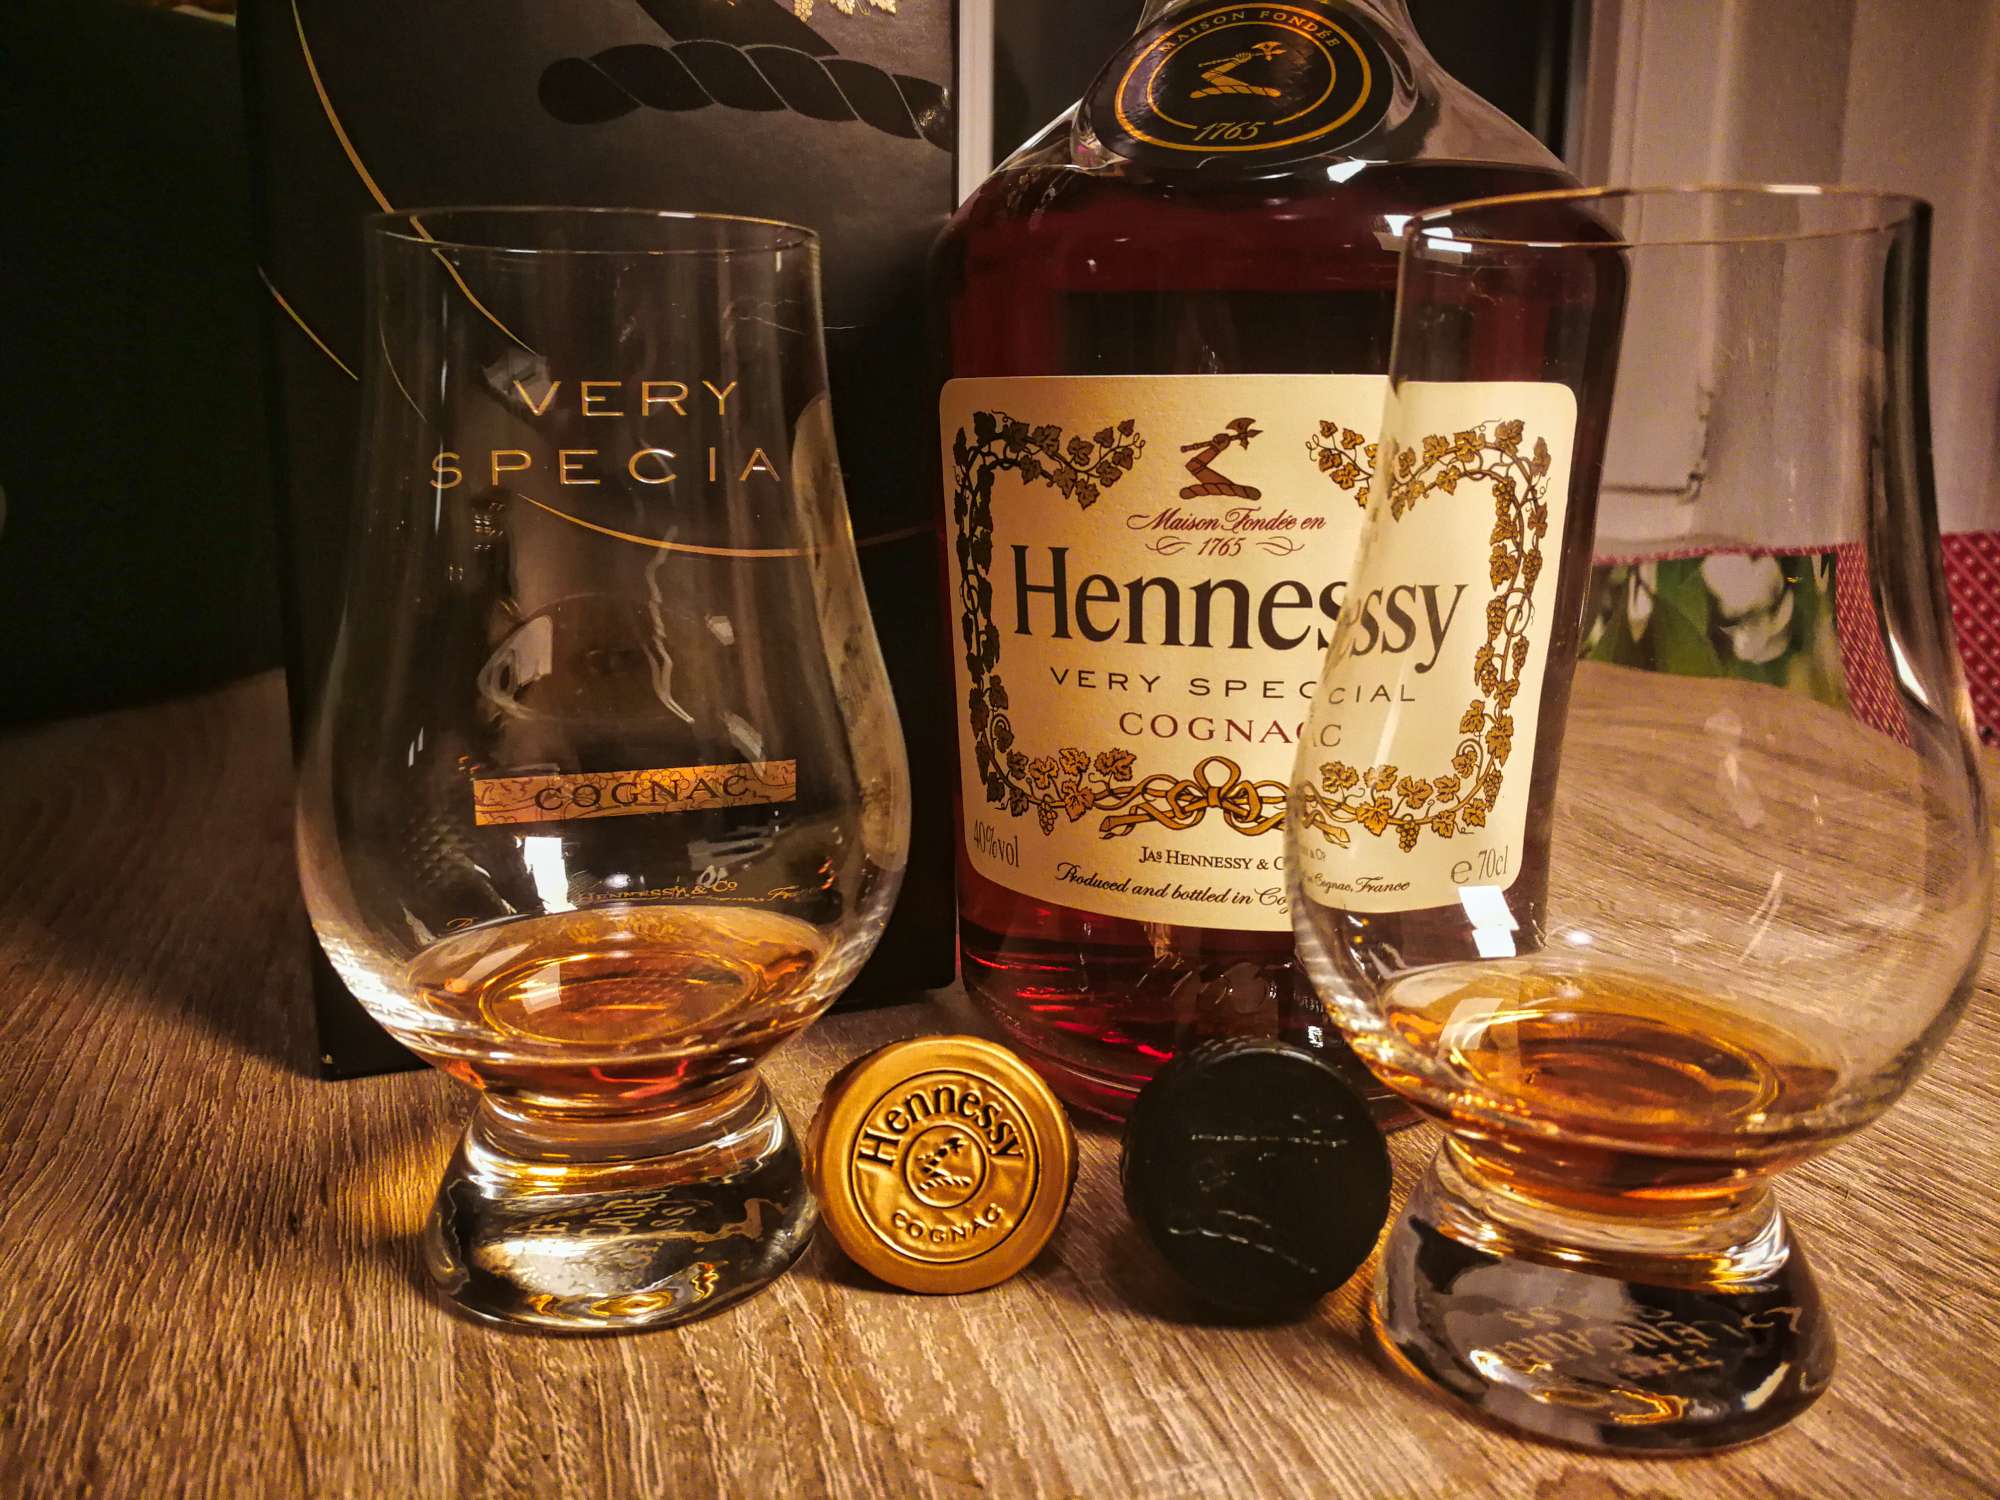 Hennessy VS Cognac Review